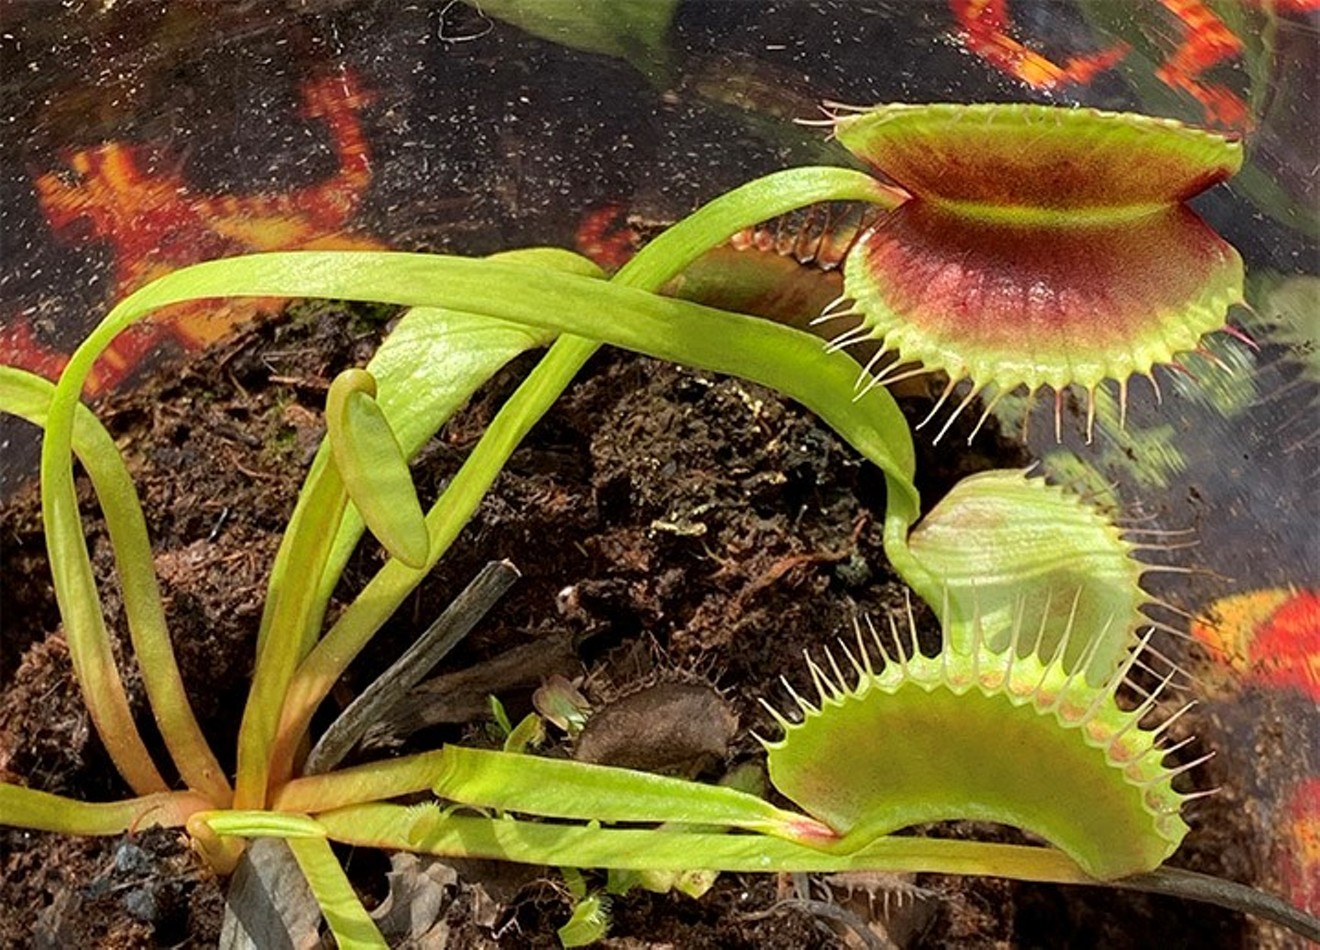 This Venus fly trap nicknamed "King Henry" is one of many species on display at the Texas Triffid Ranch, a collection of carnivorous plants in Richardson.